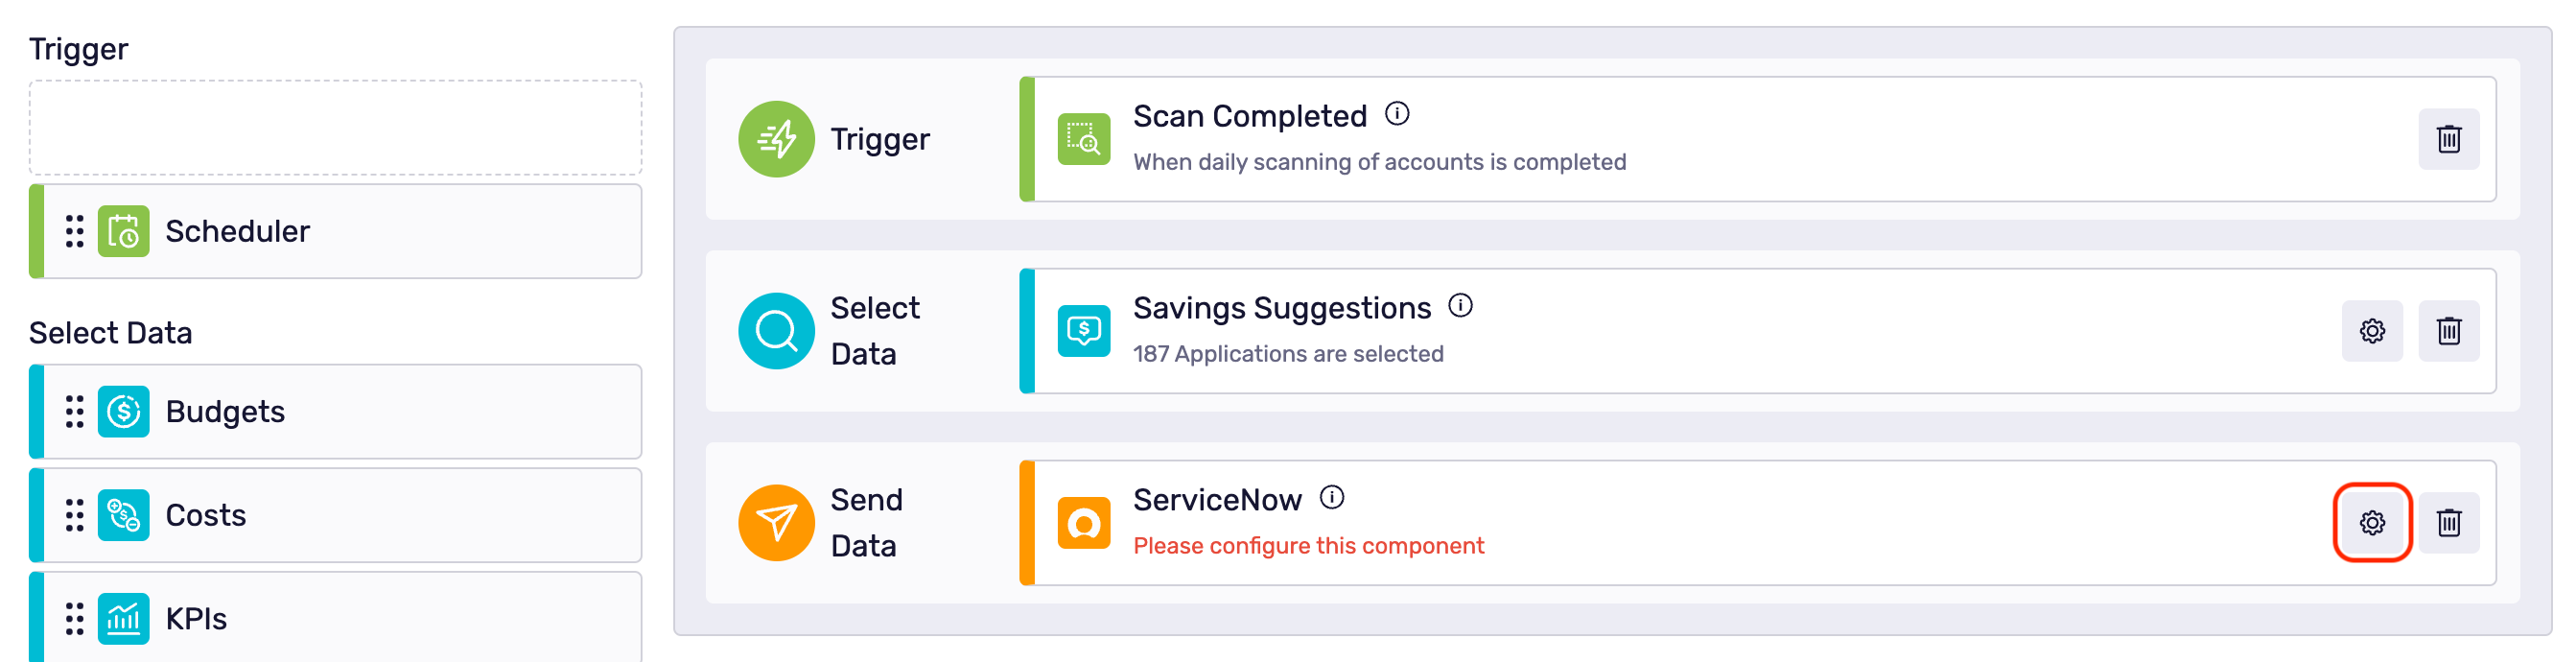 ss-servicenow-icon